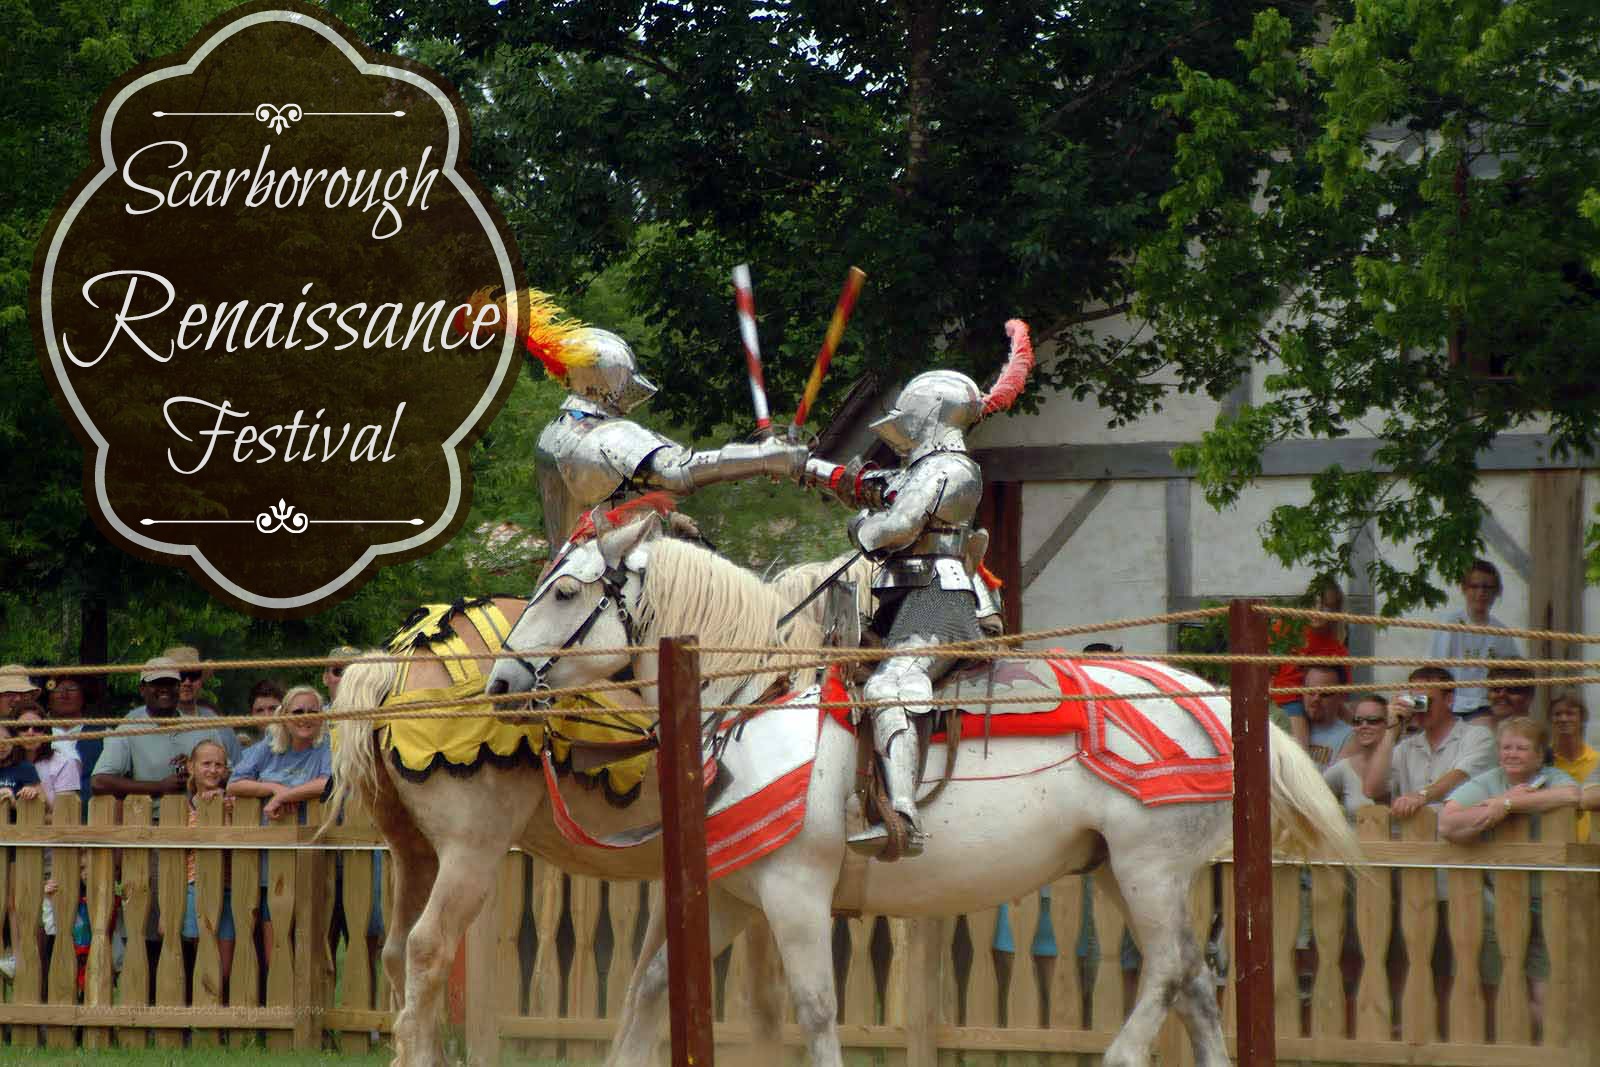 Are You Going to Scarborough Faire? : A Family Guide to a Texas Sized Renaissance Festival